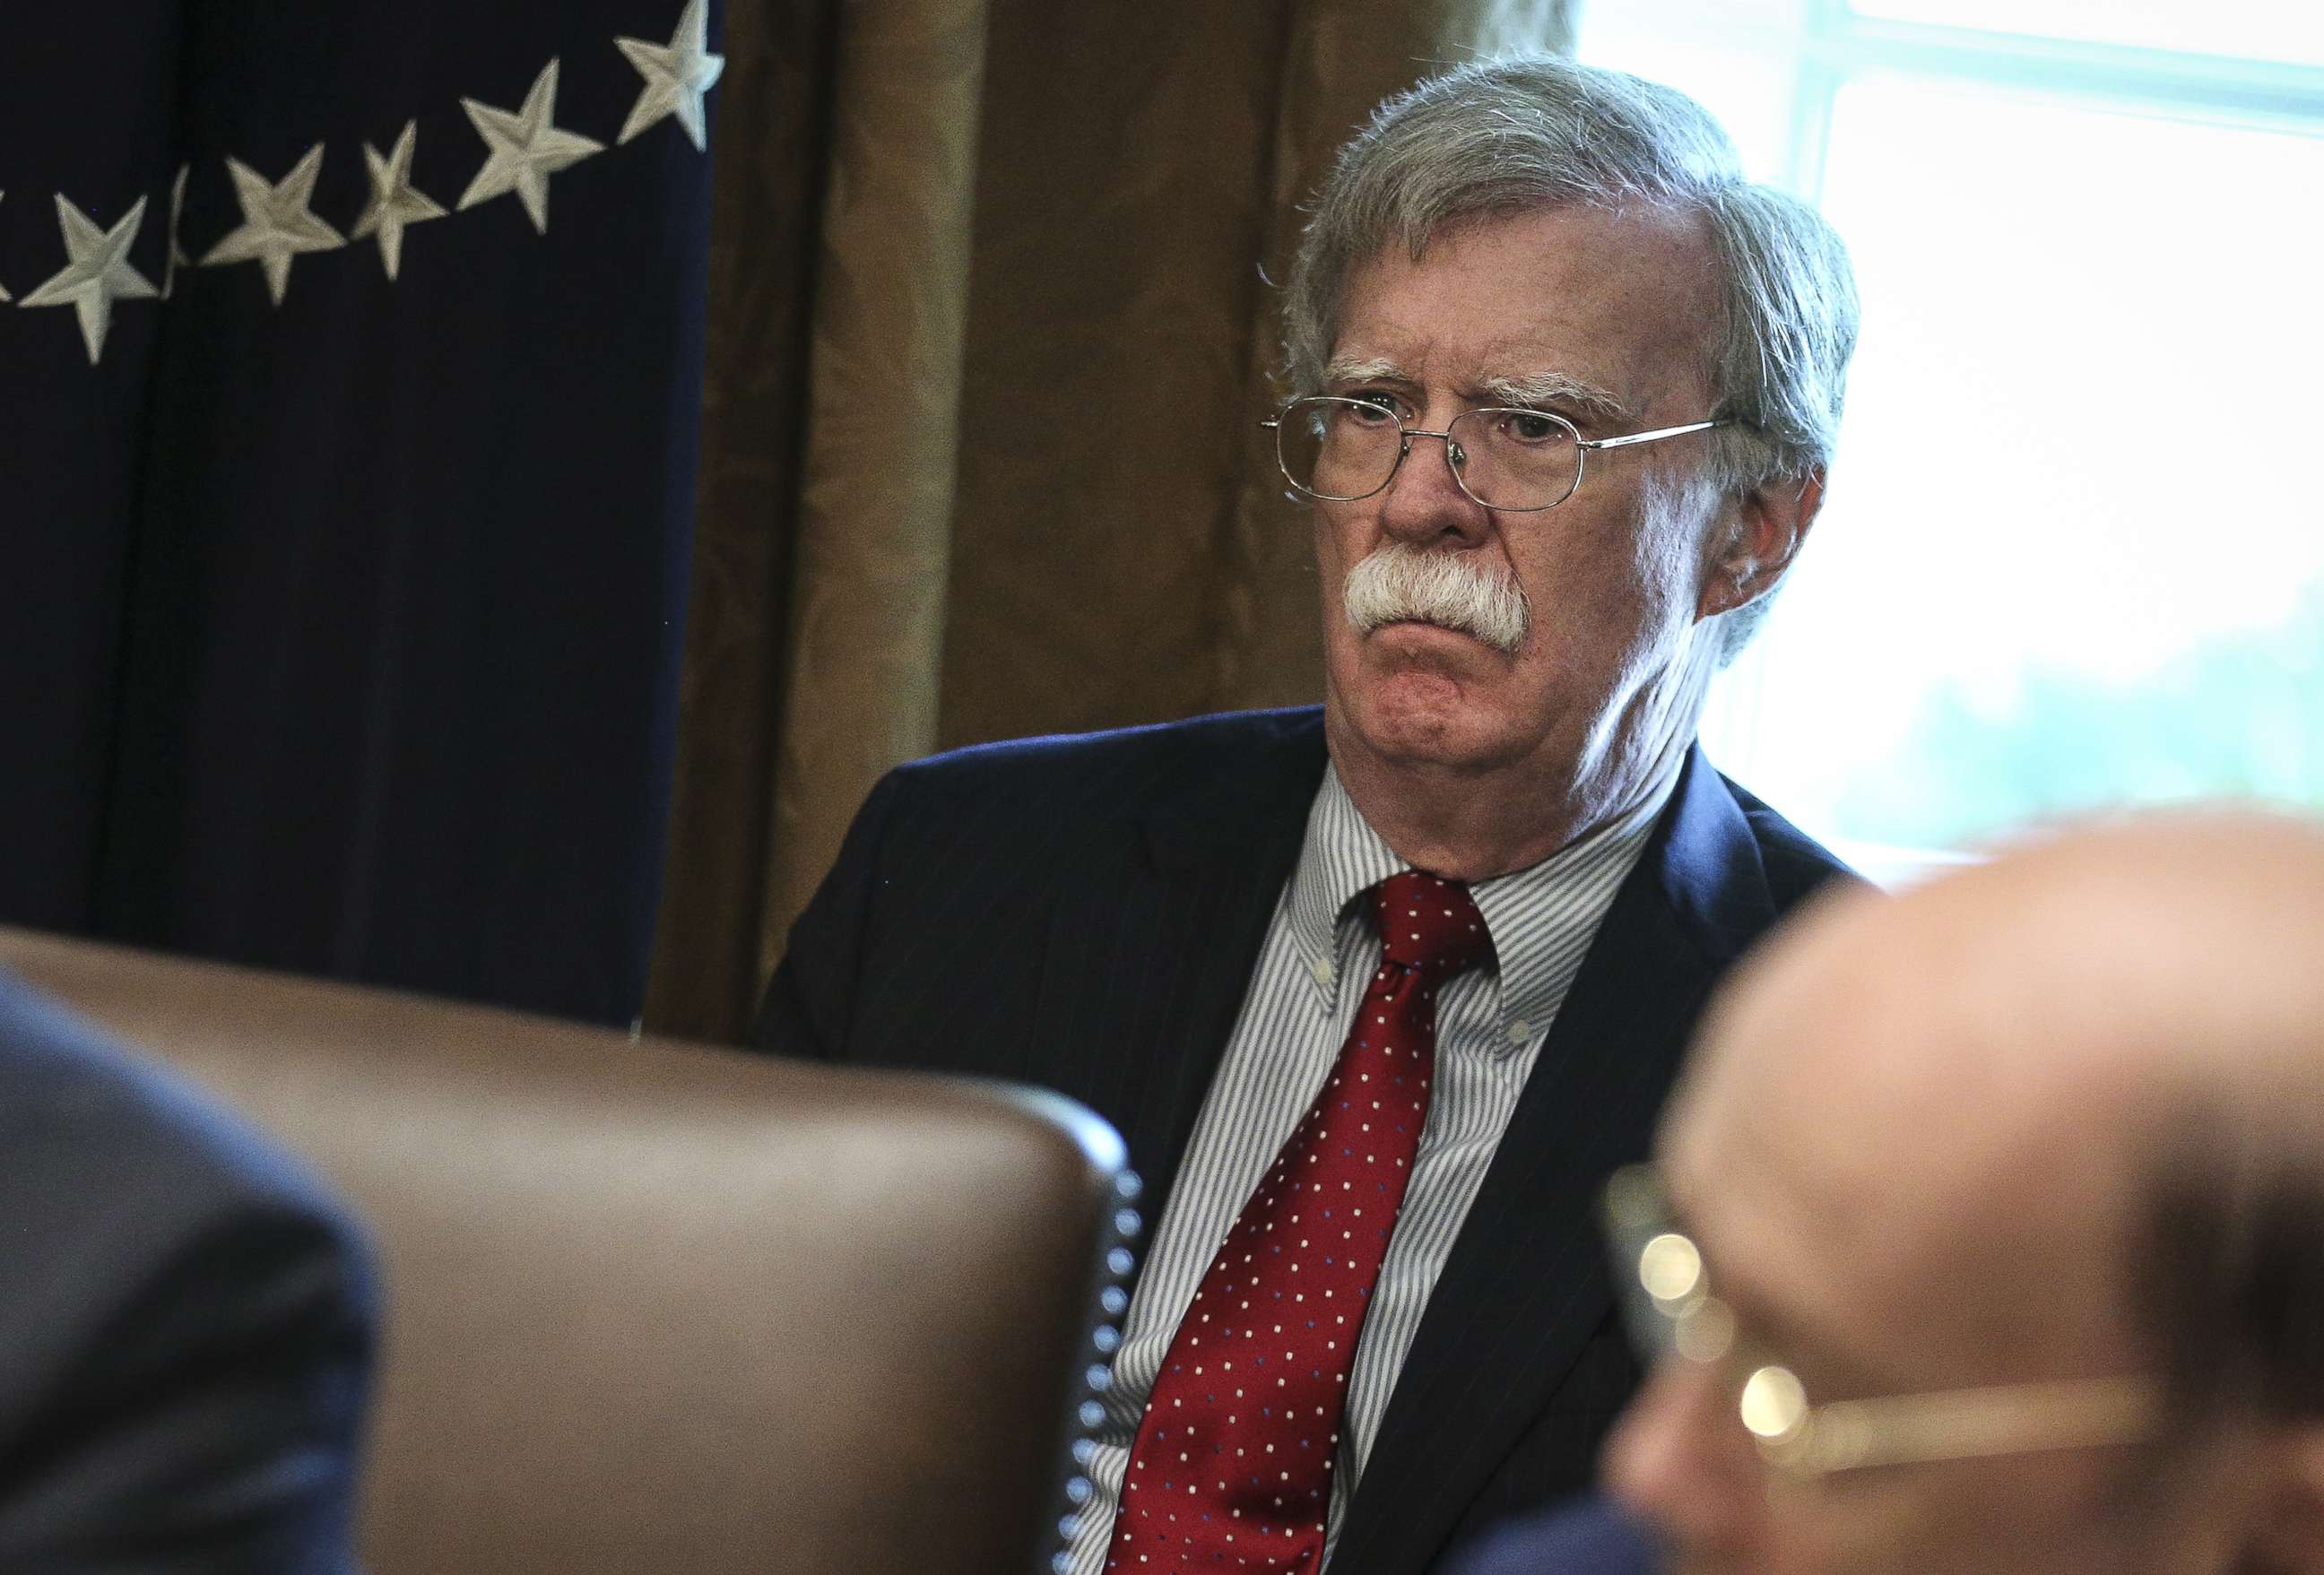 PHOTO: National security adviser John Bolton listens during a meeting with President Donald Trump, not pictured, in the Cabinet Room of the White House in Washington, D.C., Aug. 16, 2018.